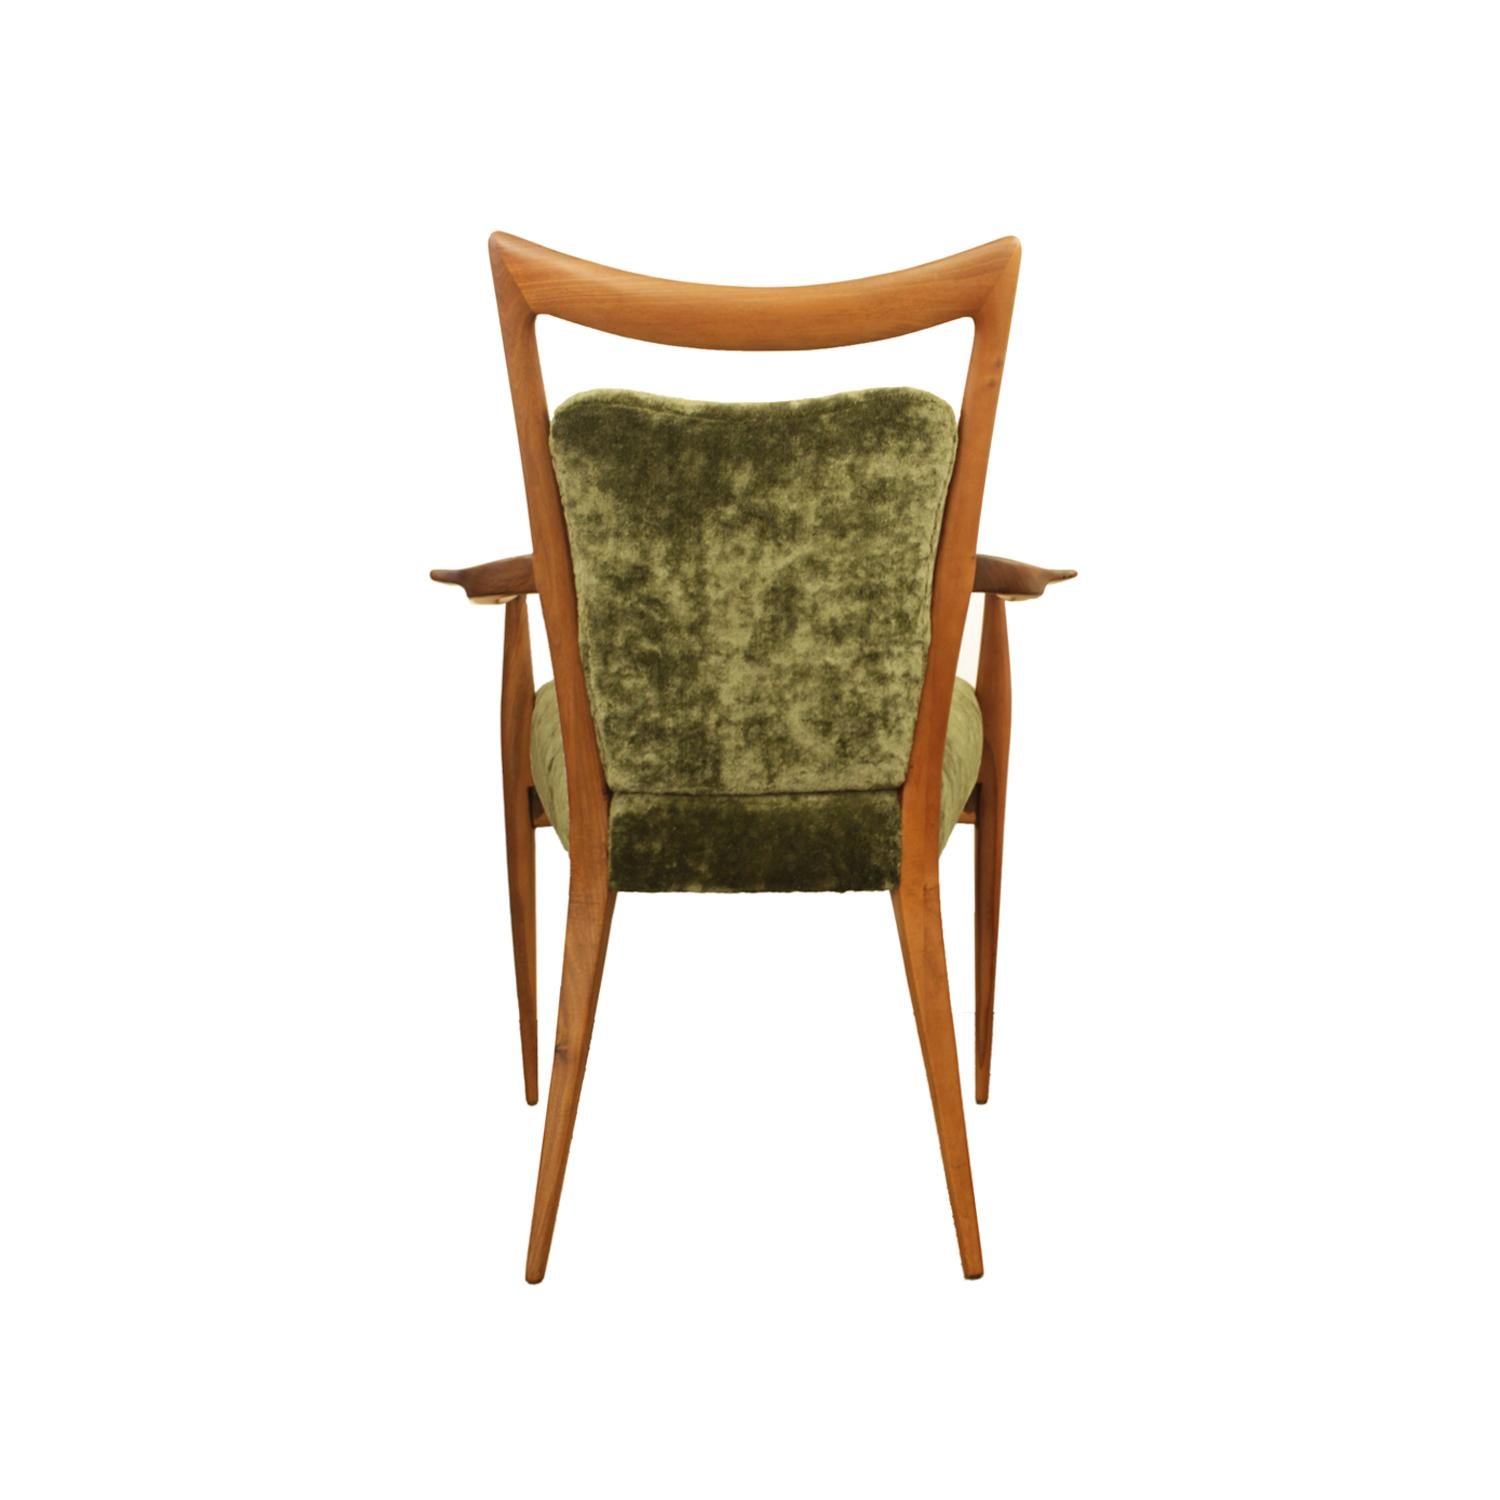 Linen Melchiorre Bega Exceptional Set of 12 Upholstered Dining Chairs. 1950s